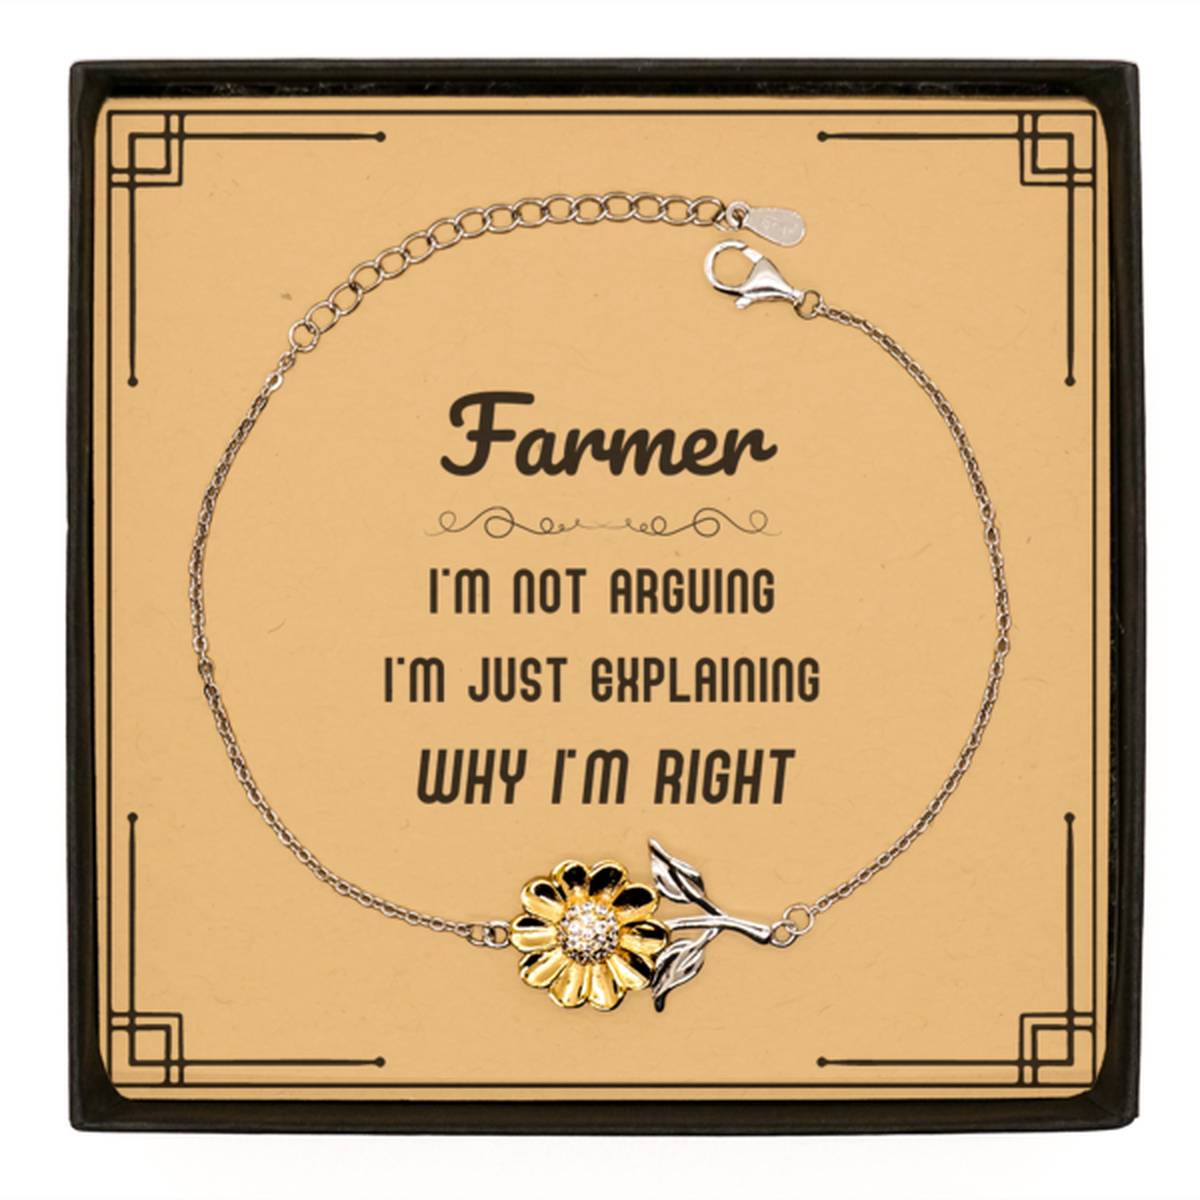 Farmer I'm not Arguing. I'm Just Explaining Why I'm RIGHT Sunflower Bracelet, Funny Saying Quote Farmer Gifts For Farmer Message Card Graduation Birthday Christmas Gifts for Men Women Coworker